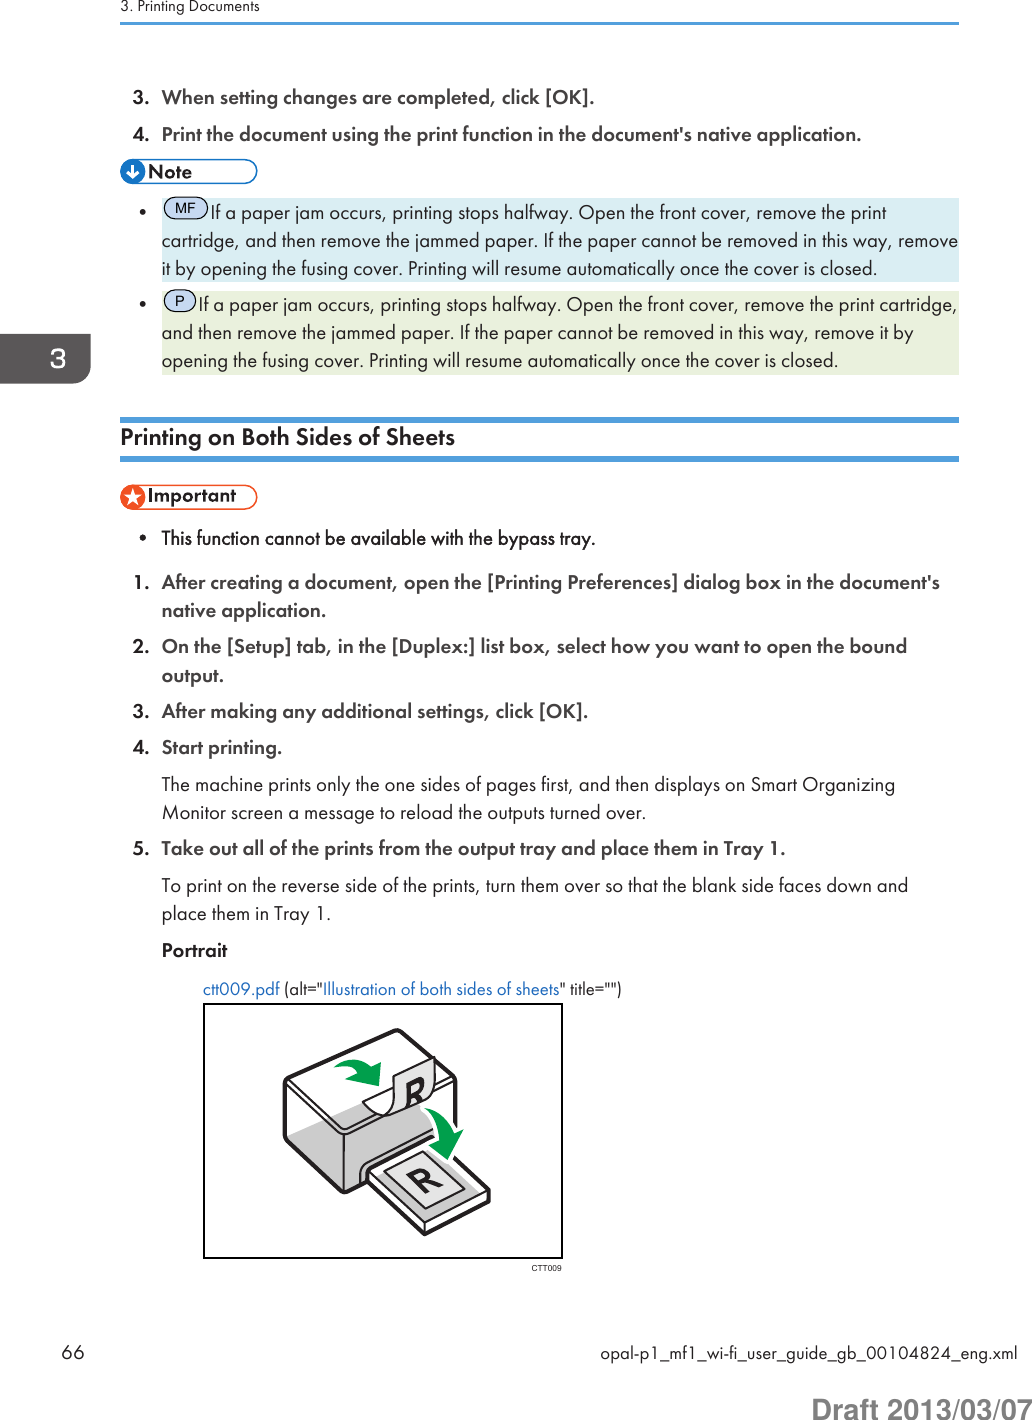 3. When setting changes are completed, click [OK].4. Print the document using the print function in the document&apos;s native application.•MFIf a paper jam occurs, printing stops halfway. Open the front cover, remove the printcartridge, and then remove the jammed paper. If the paper cannot be removed in this way, removeit by opening the fusing cover. Printing will resume automatically once the cover is closed.•PIf a paper jam occurs, printing stops halfway. Open the front cover, remove the print cartridge,and then remove the jammed paper. If the paper cannot be removed in this way, remove it byopening the fusing cover. Printing will resume automatically once the cover is closed.Printing on Both Sides of Sheets• This function cannot be available with the bypass tray.1. After creating a document, open the [Printing Preferences] dialog box in the document&apos;snative application.2. On the [Setup] tab, in the [Duplex:] list box, select how you want to open the boundoutput.3. After making any additional settings, click [OK].4. Start printing.The machine prints only the one sides of pages first, and then displays on Smart OrganizingMonitor screen a message to reload the outputs turned over.5. Take out all of the prints from the output tray and place them in Tray 1.To print on the reverse side of the prints, turn them over so that the blank side faces down andplace them in Tray 1.Portraitctt009.pdf (alt=&quot;Illustration of both sides of sheets&quot; title=&quot;&quot;)CTT0093. Printing Documents66 opal-p1_mf1_wi-fi_user_guide_gb_00104824_eng.xmlDraft 2013/03/07